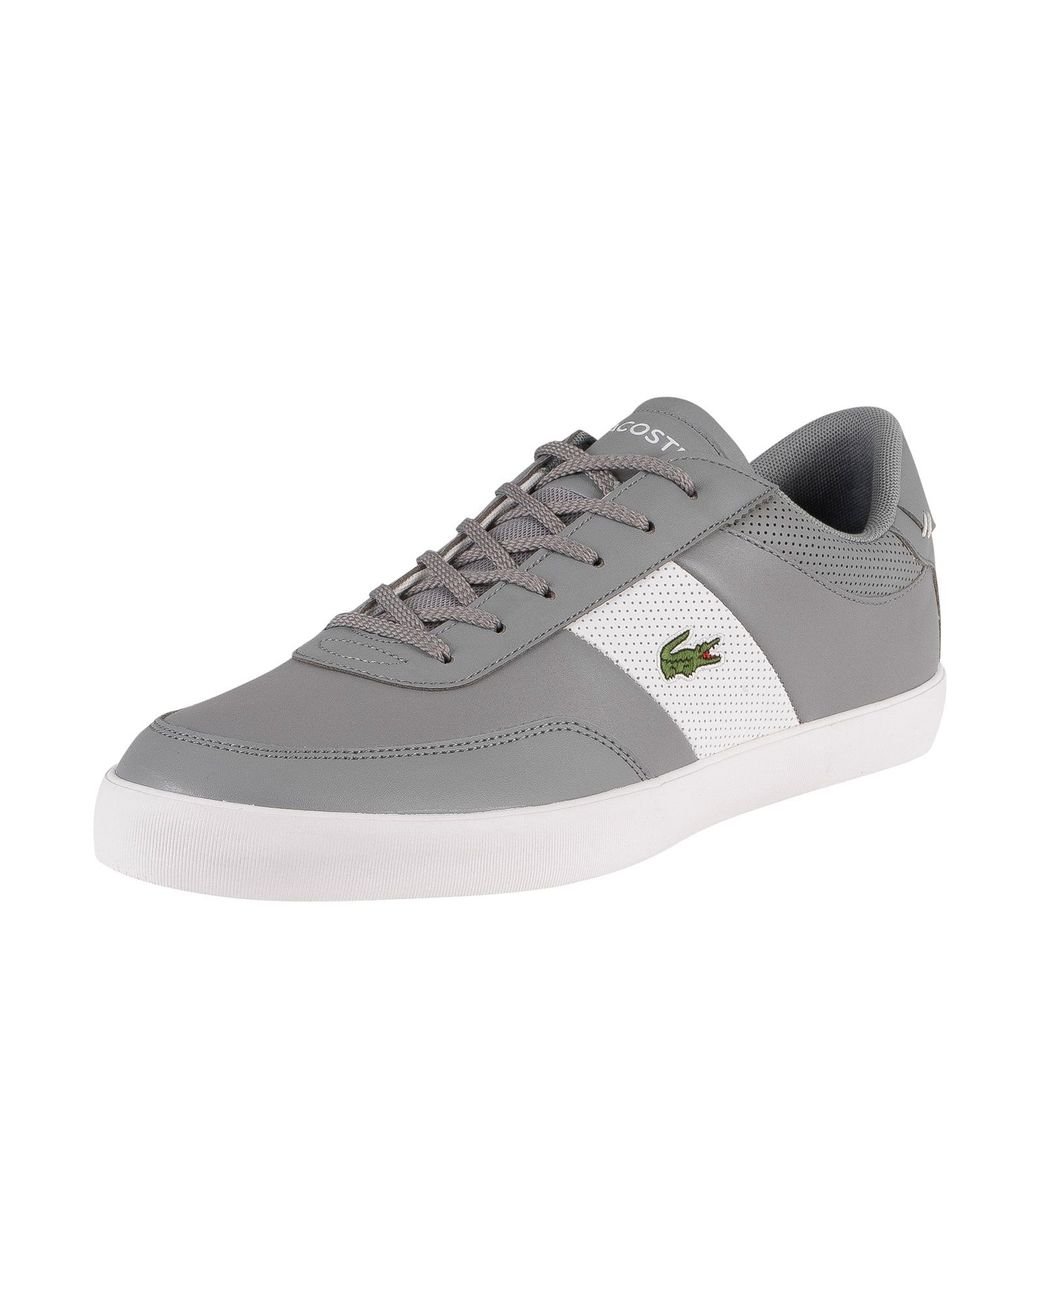 Lacoste Court Master 0120 1 Cma Leather Trainers in Grey/White (Gray ...